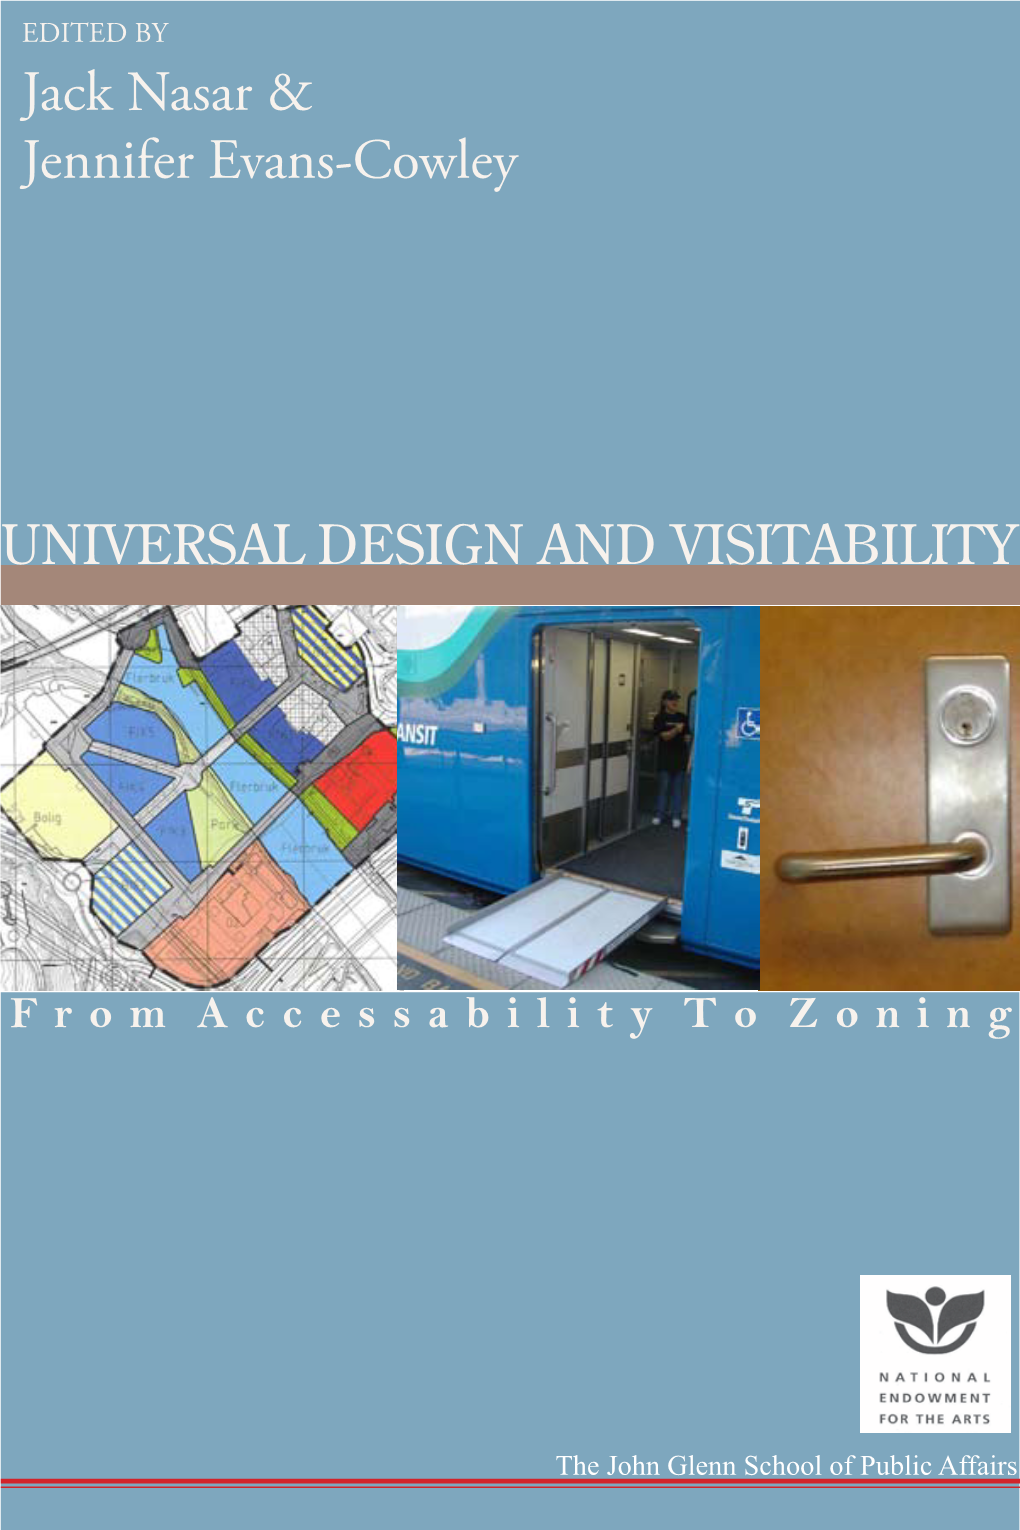 Universal Design and Visitability